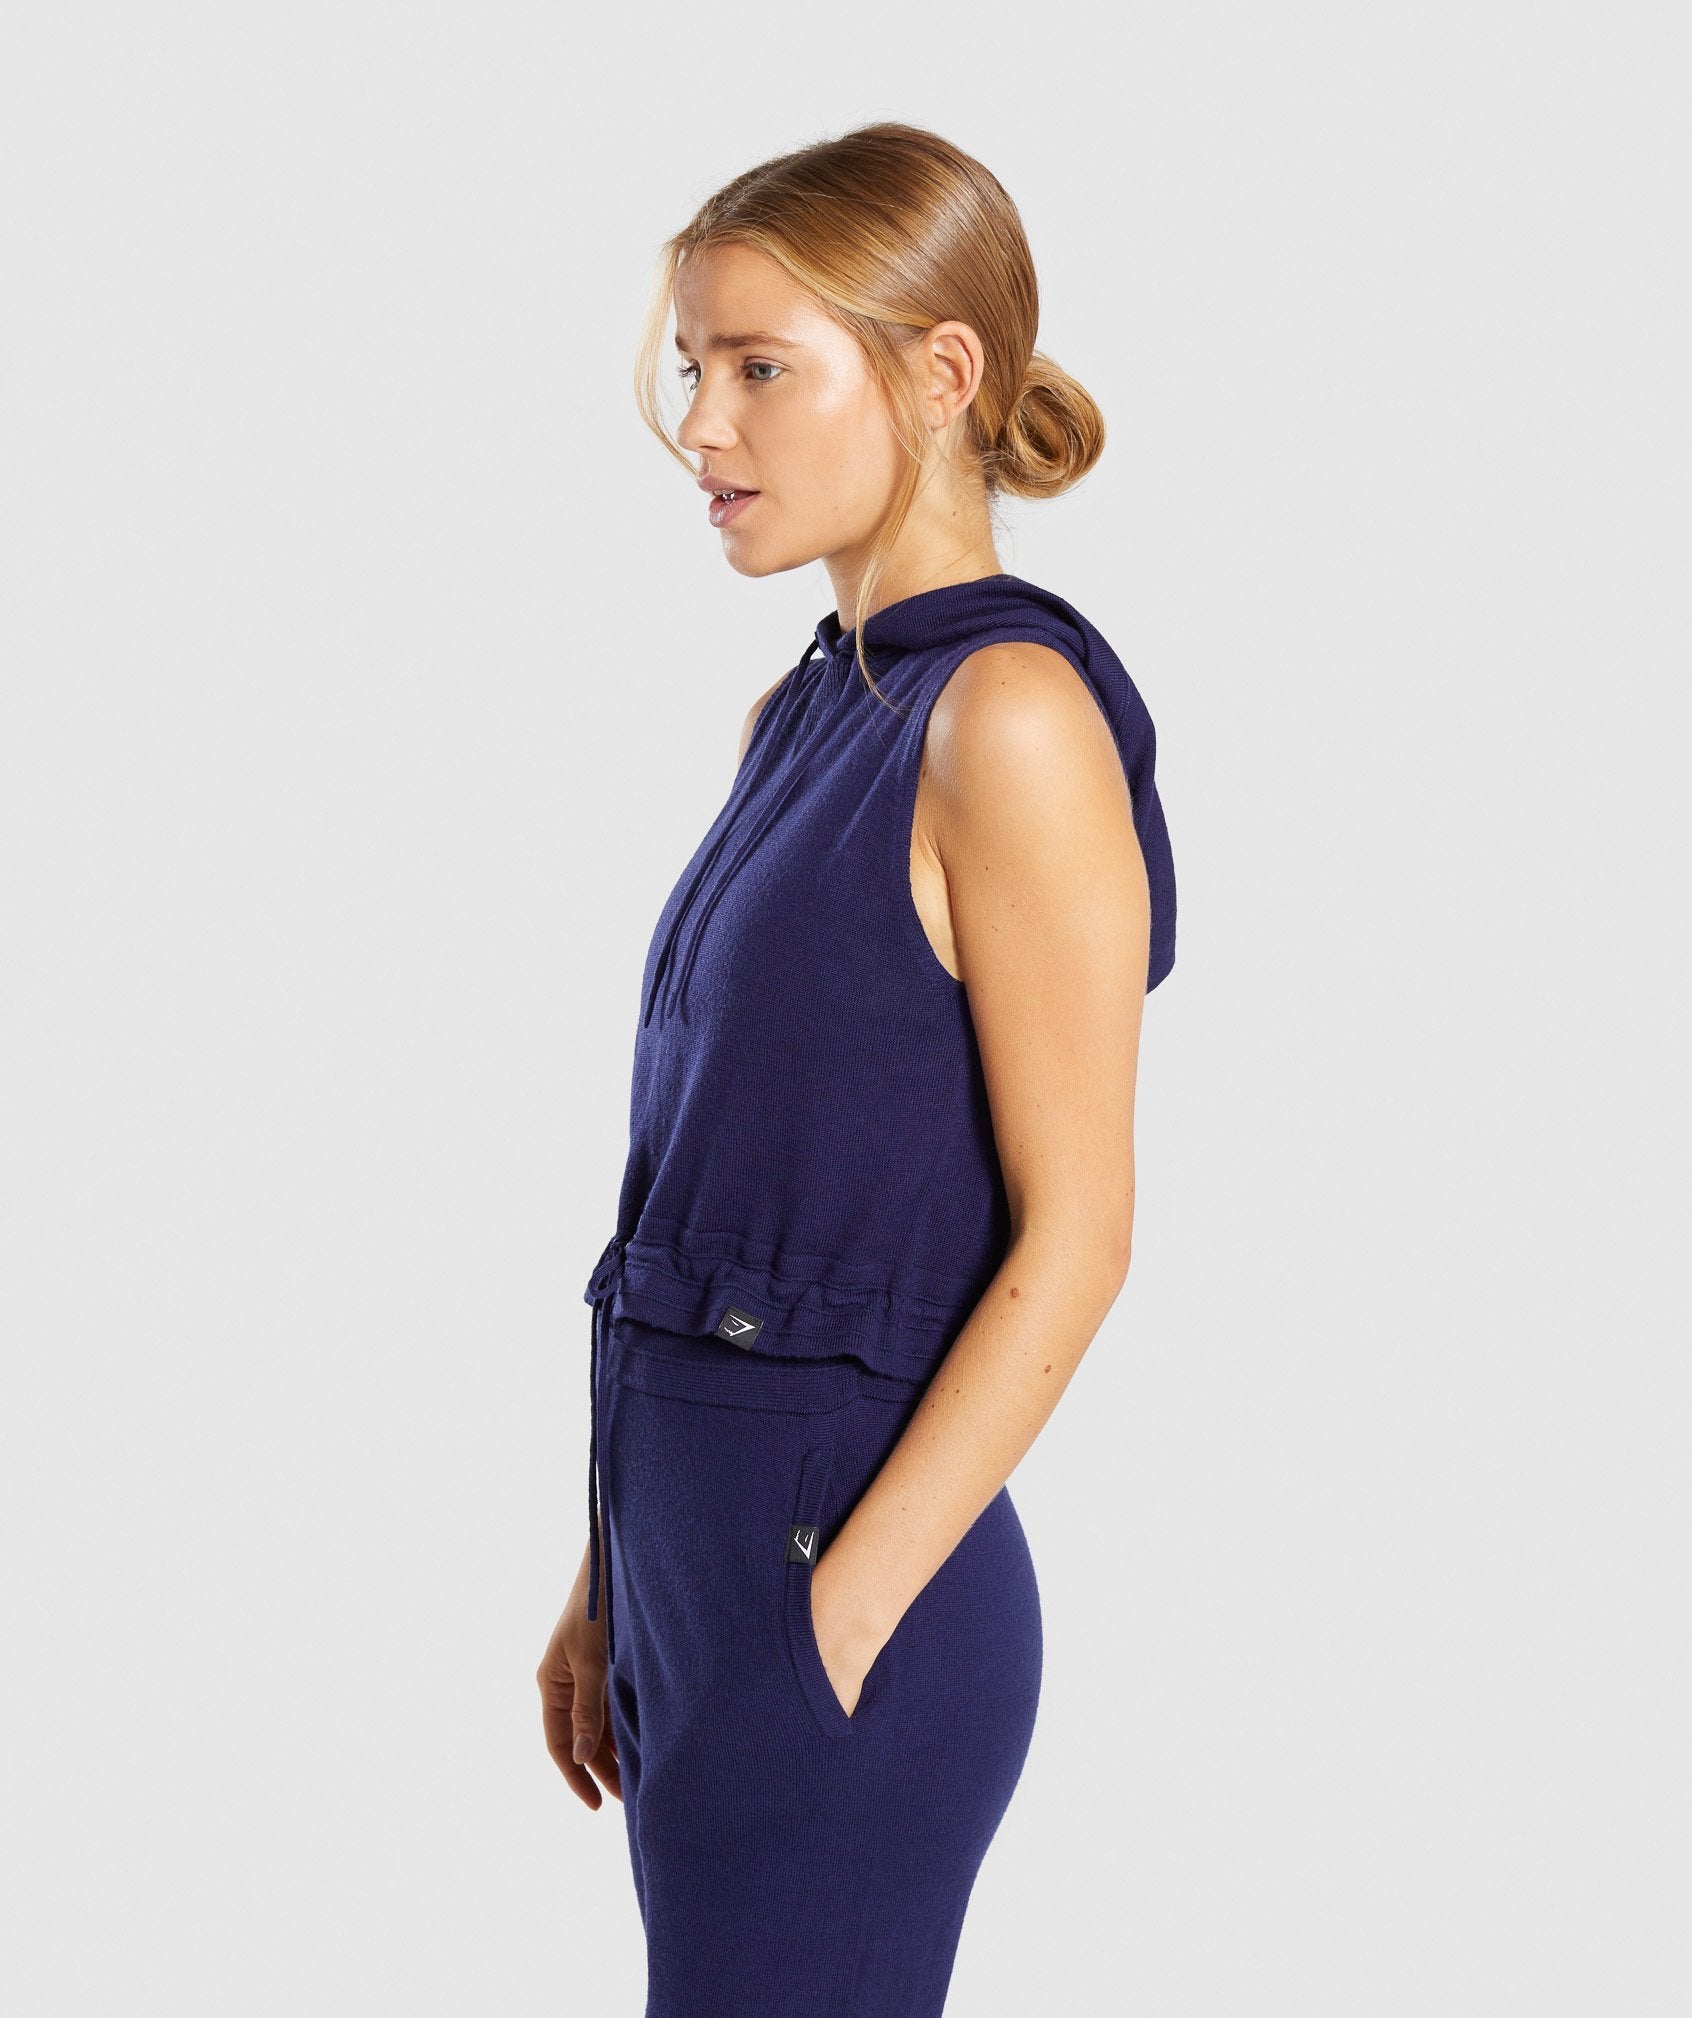 Isla Knit Sleeveless Hoodie in Evening Navy Blue - view 2